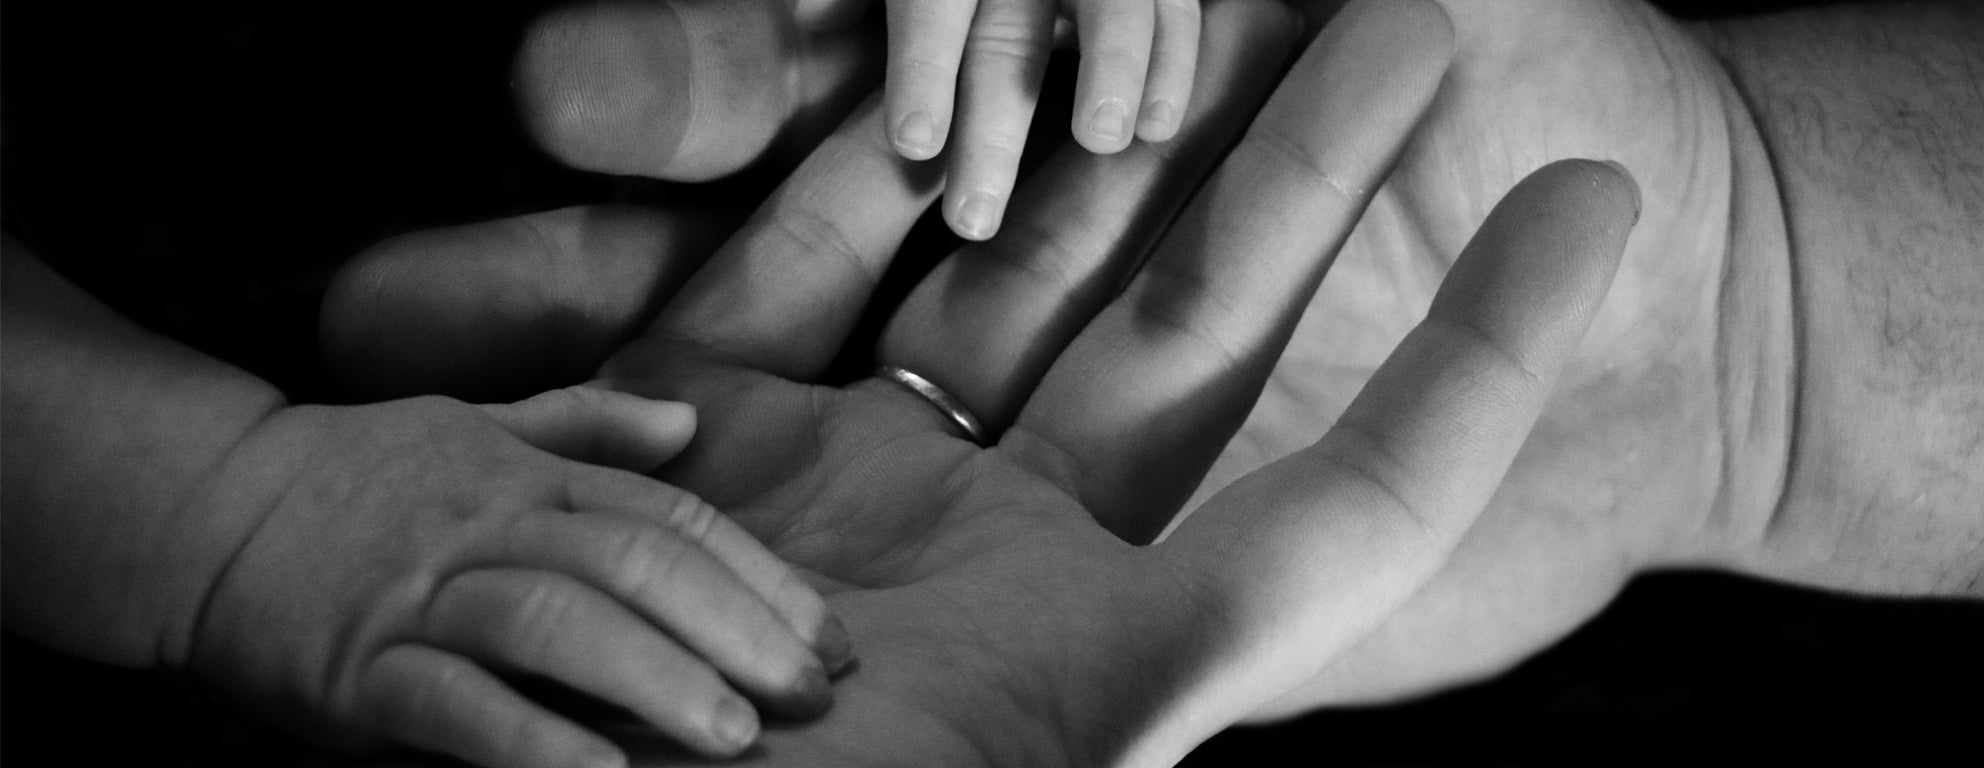 Black and white close up of adult hands holding baby hands. The adult hand has a wedding ring.